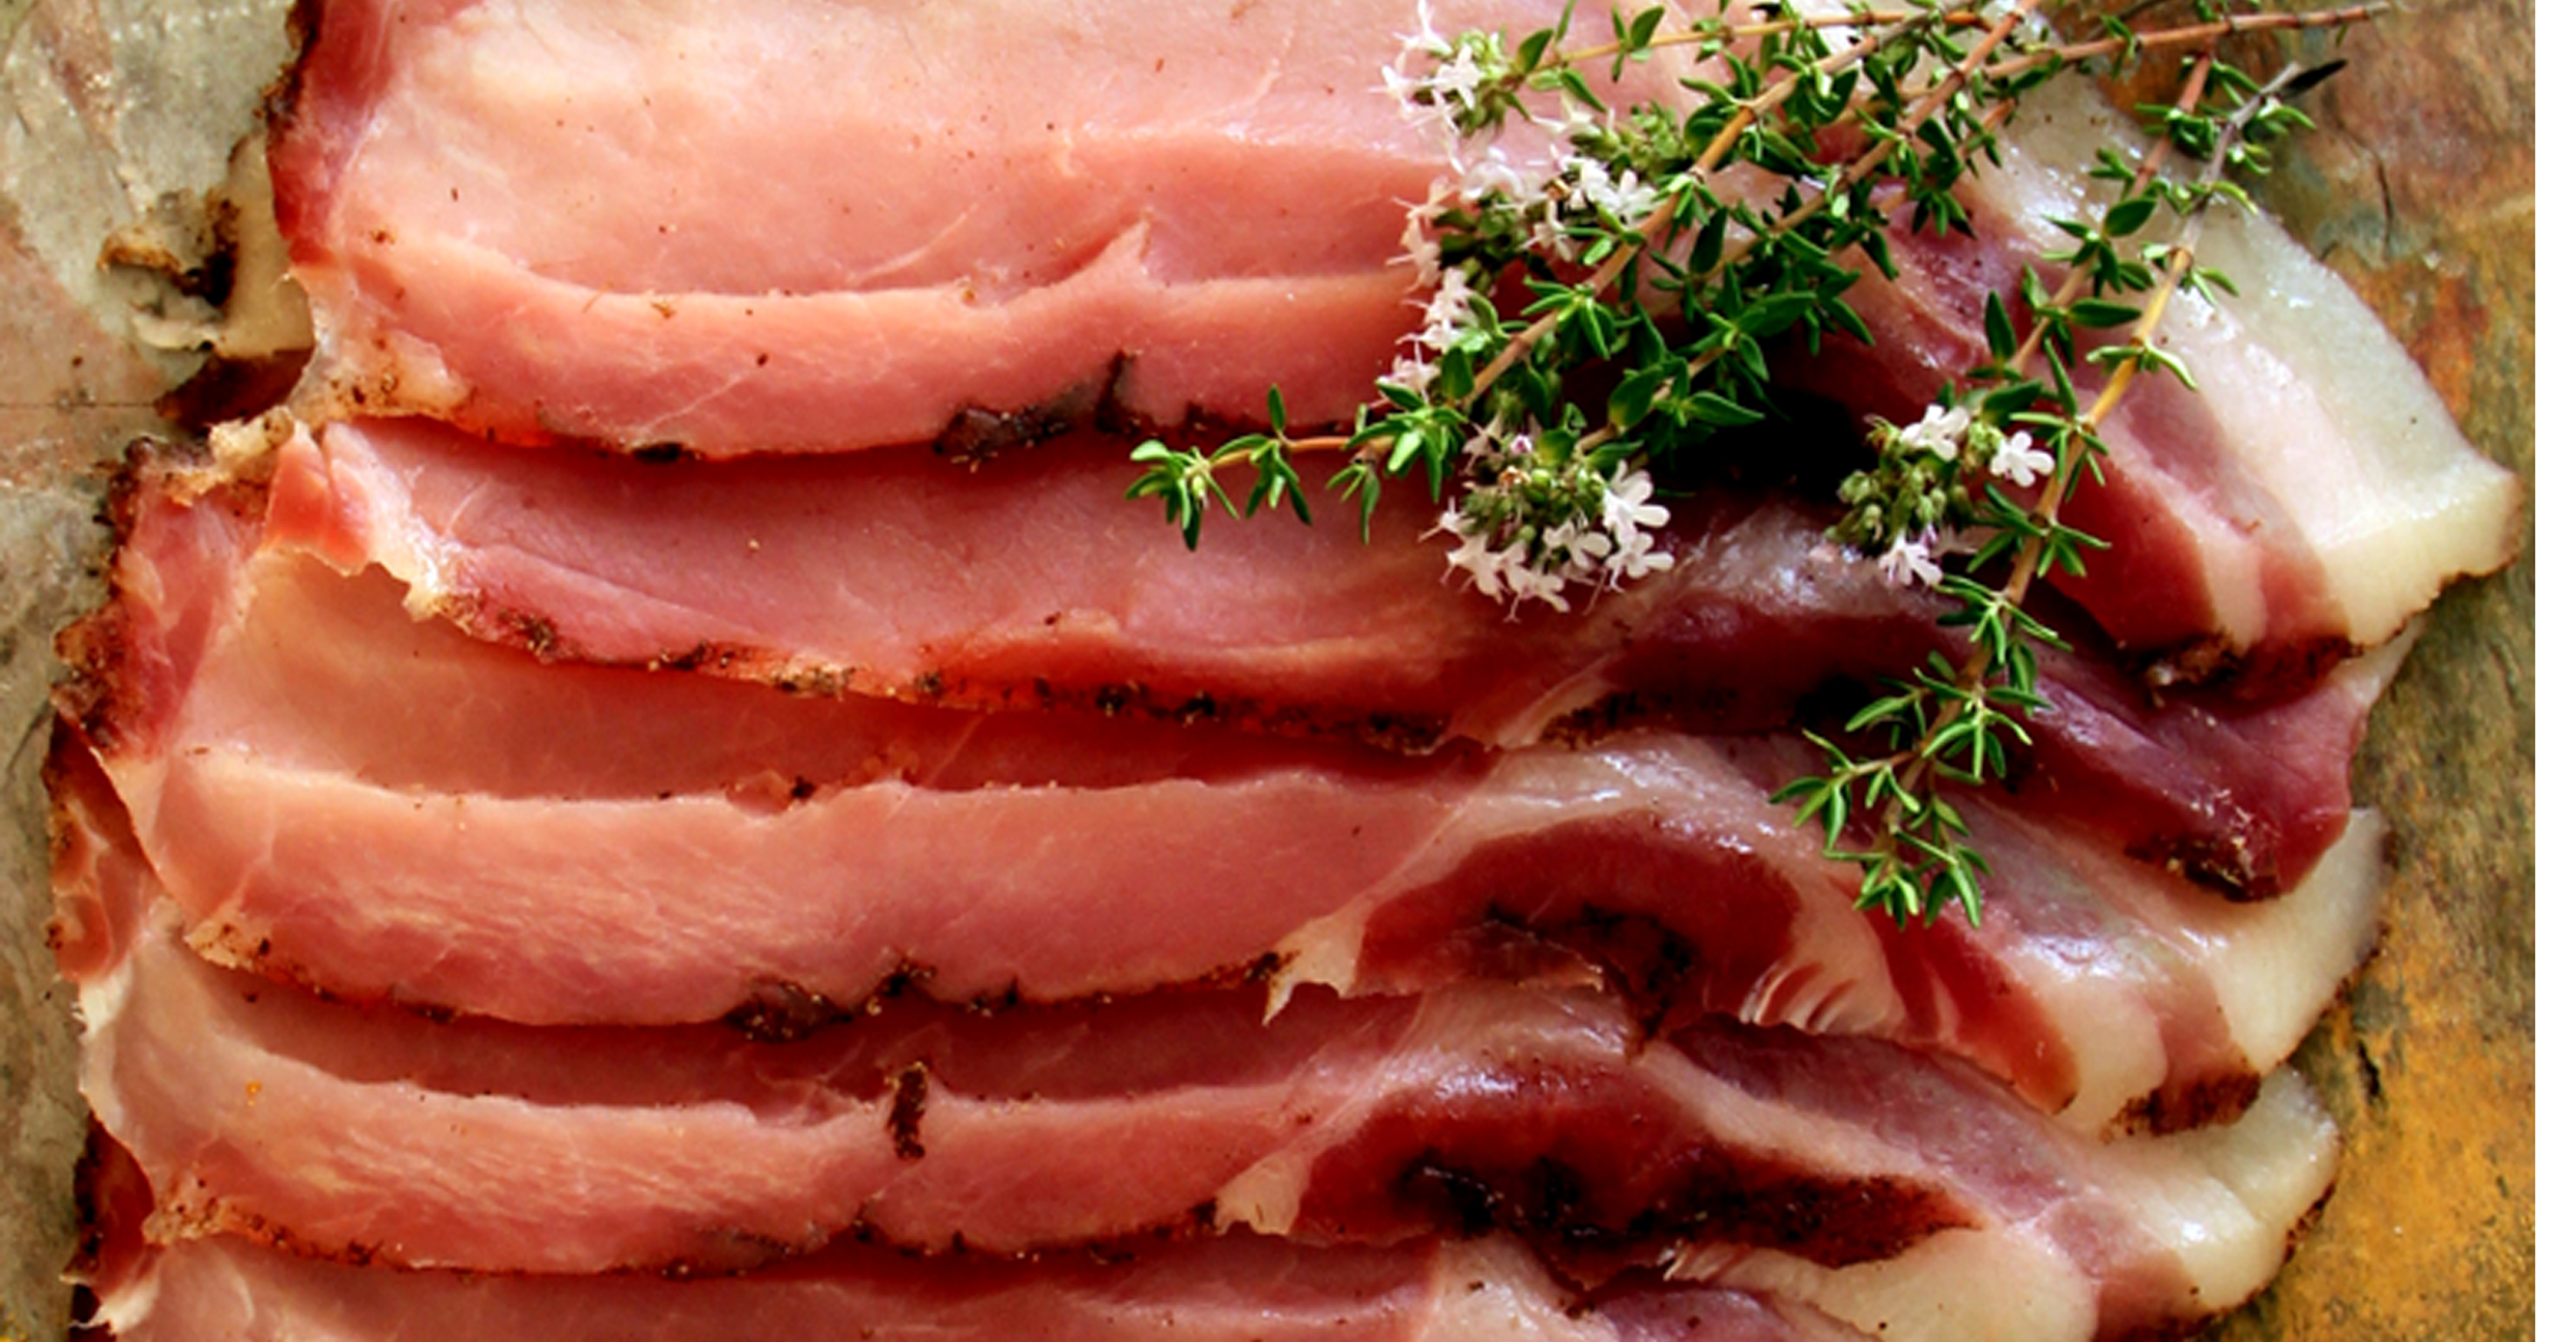 Sliced bacon with herbs